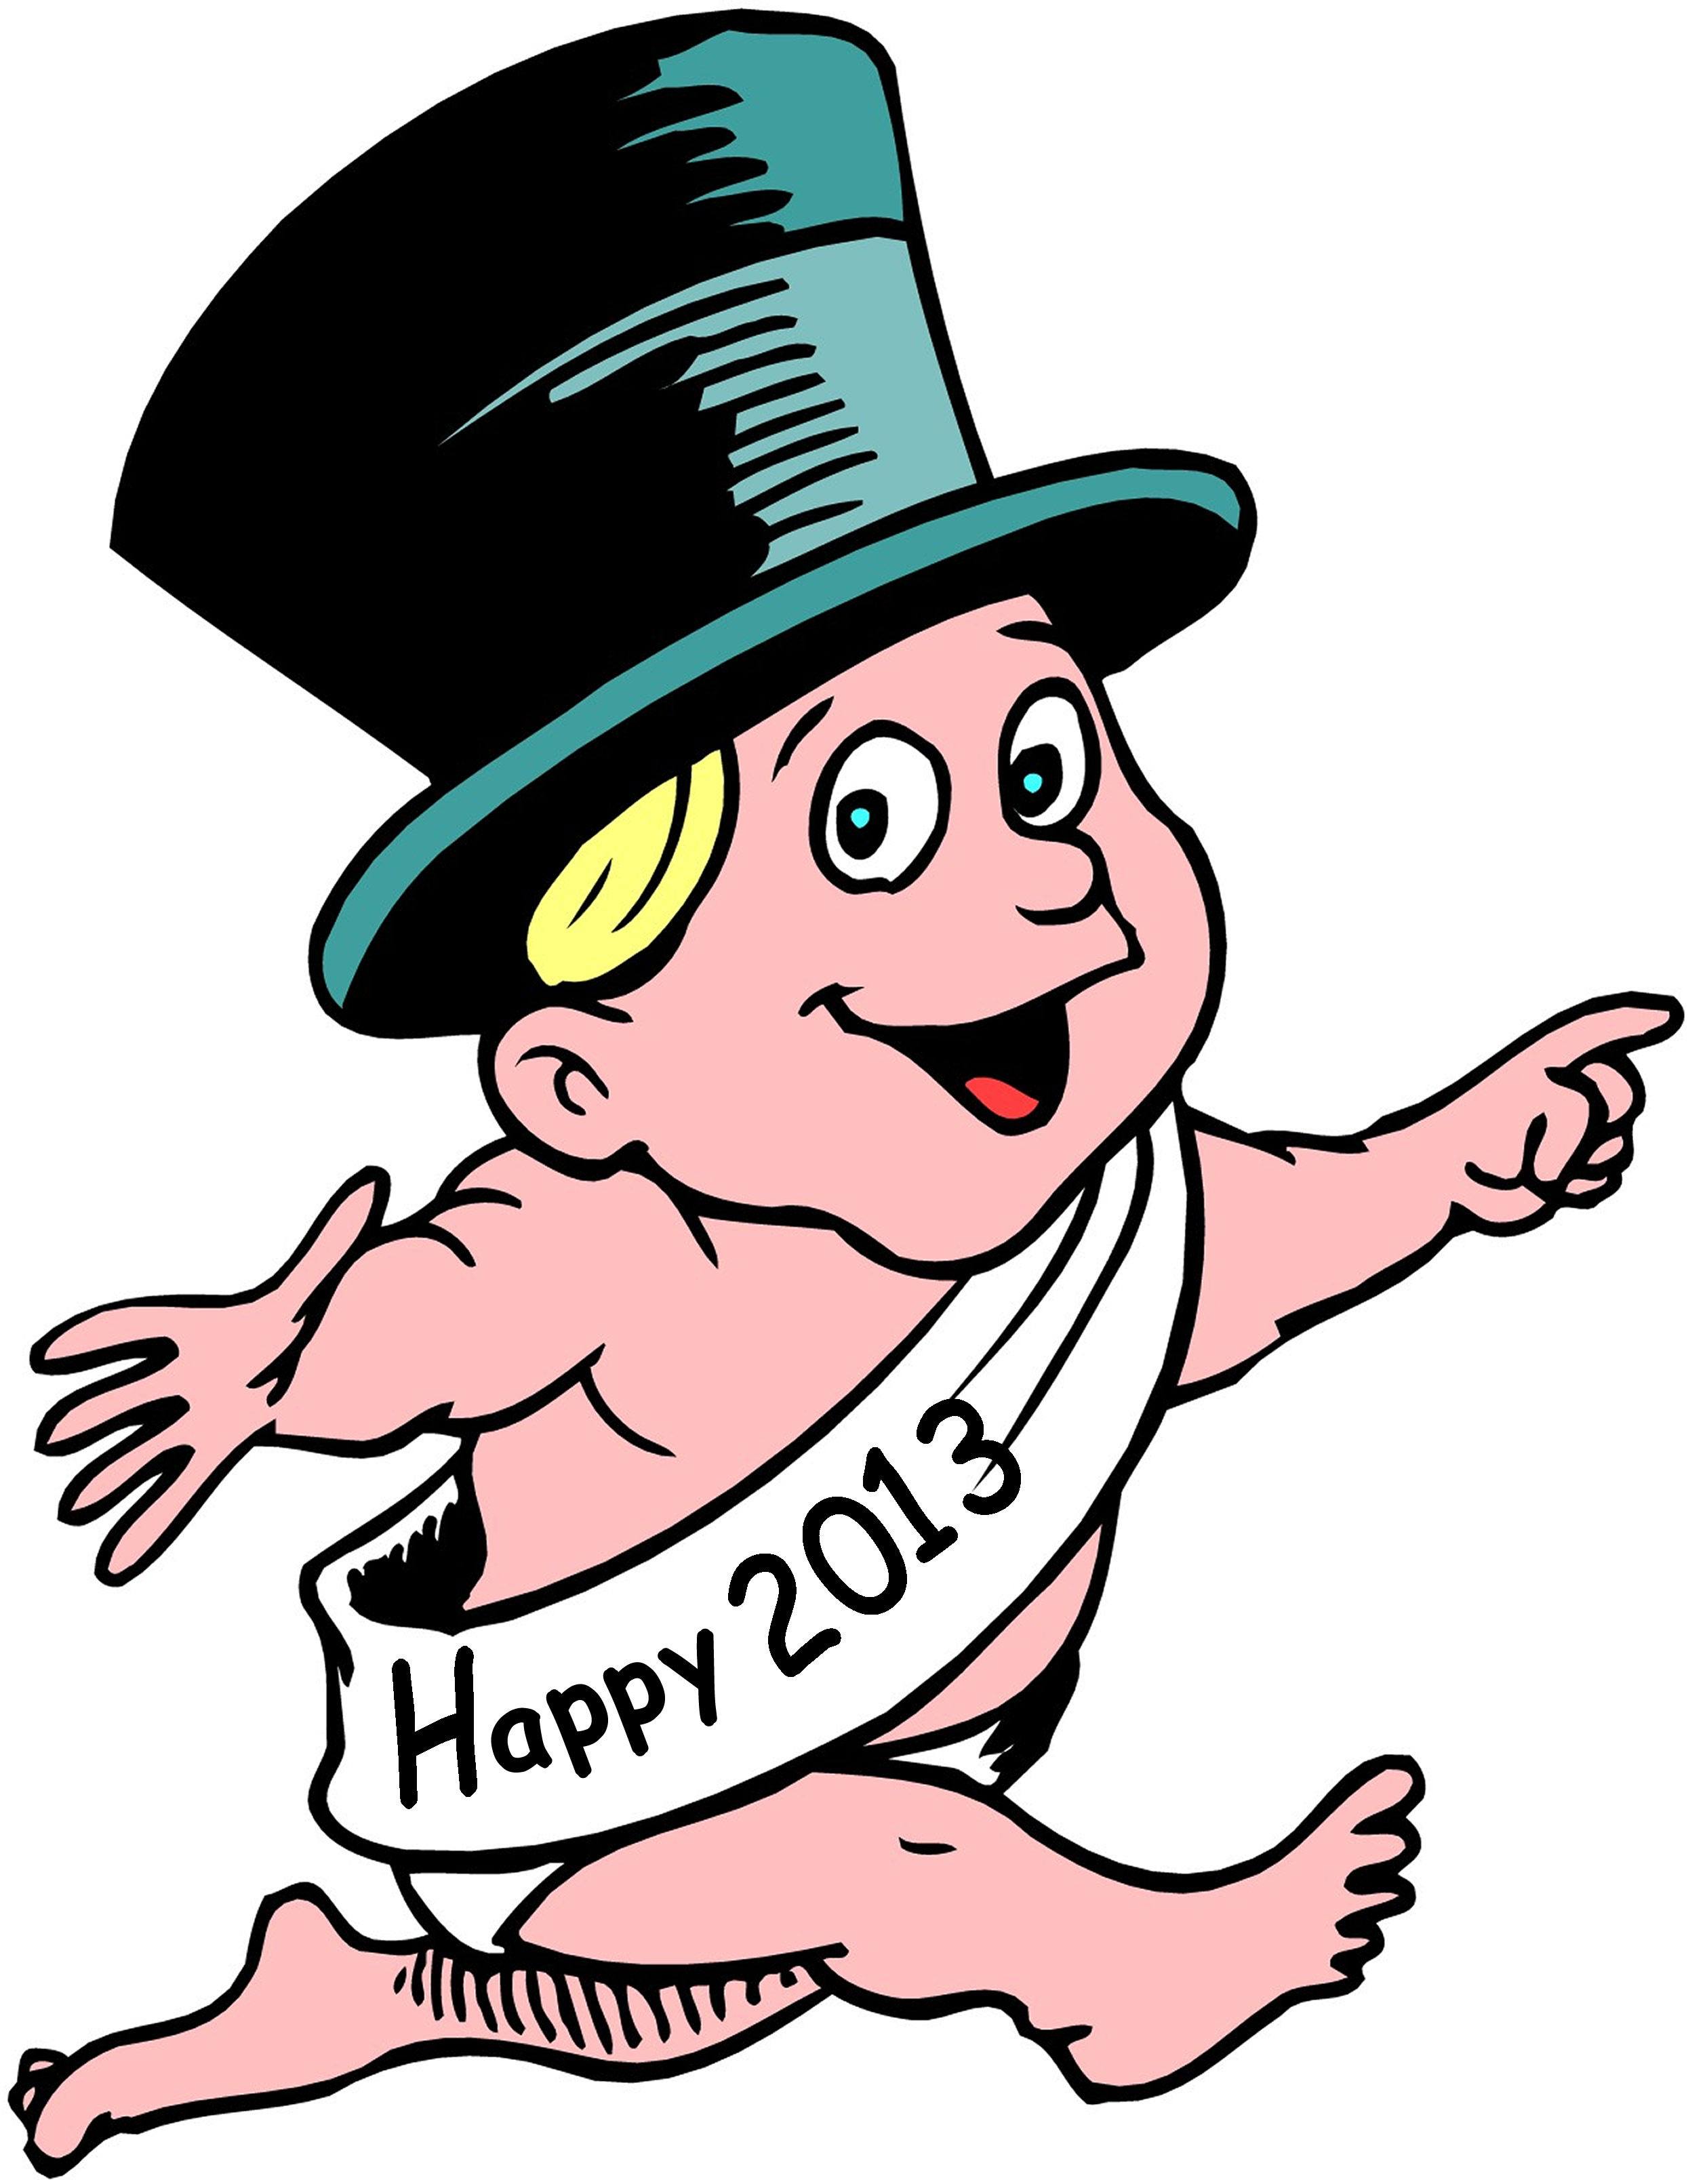 Pictures For New Years | Free Download Clip Art | Free Clip Art ...